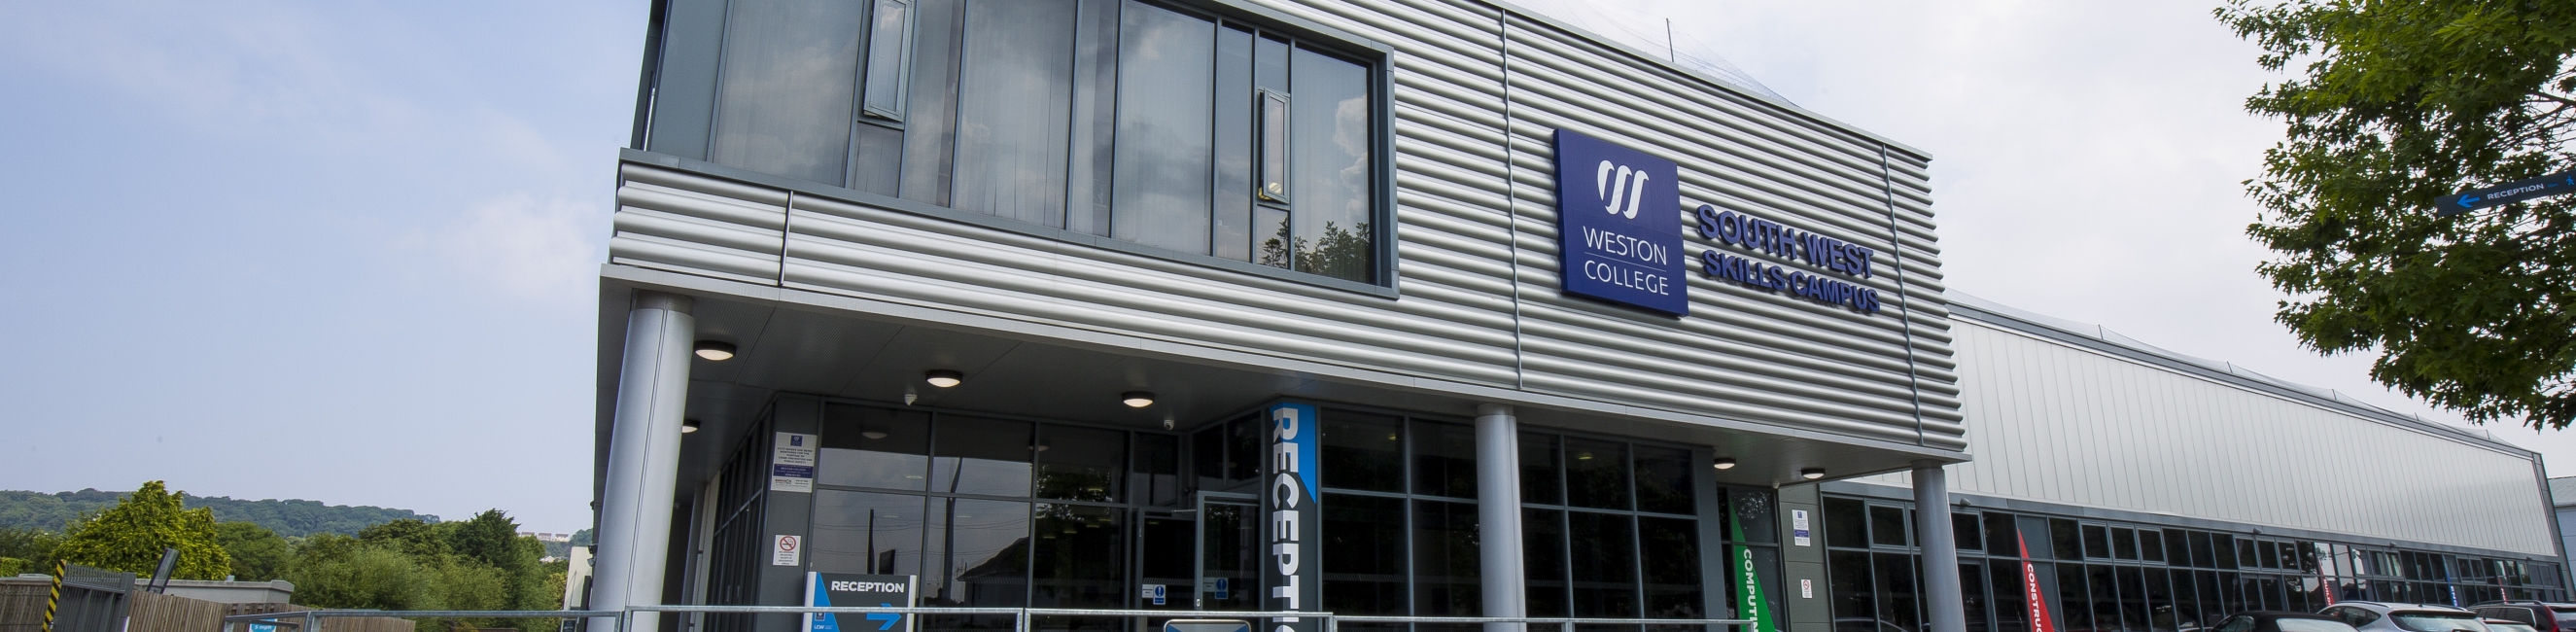 south west skills campus, discover courses with weston college